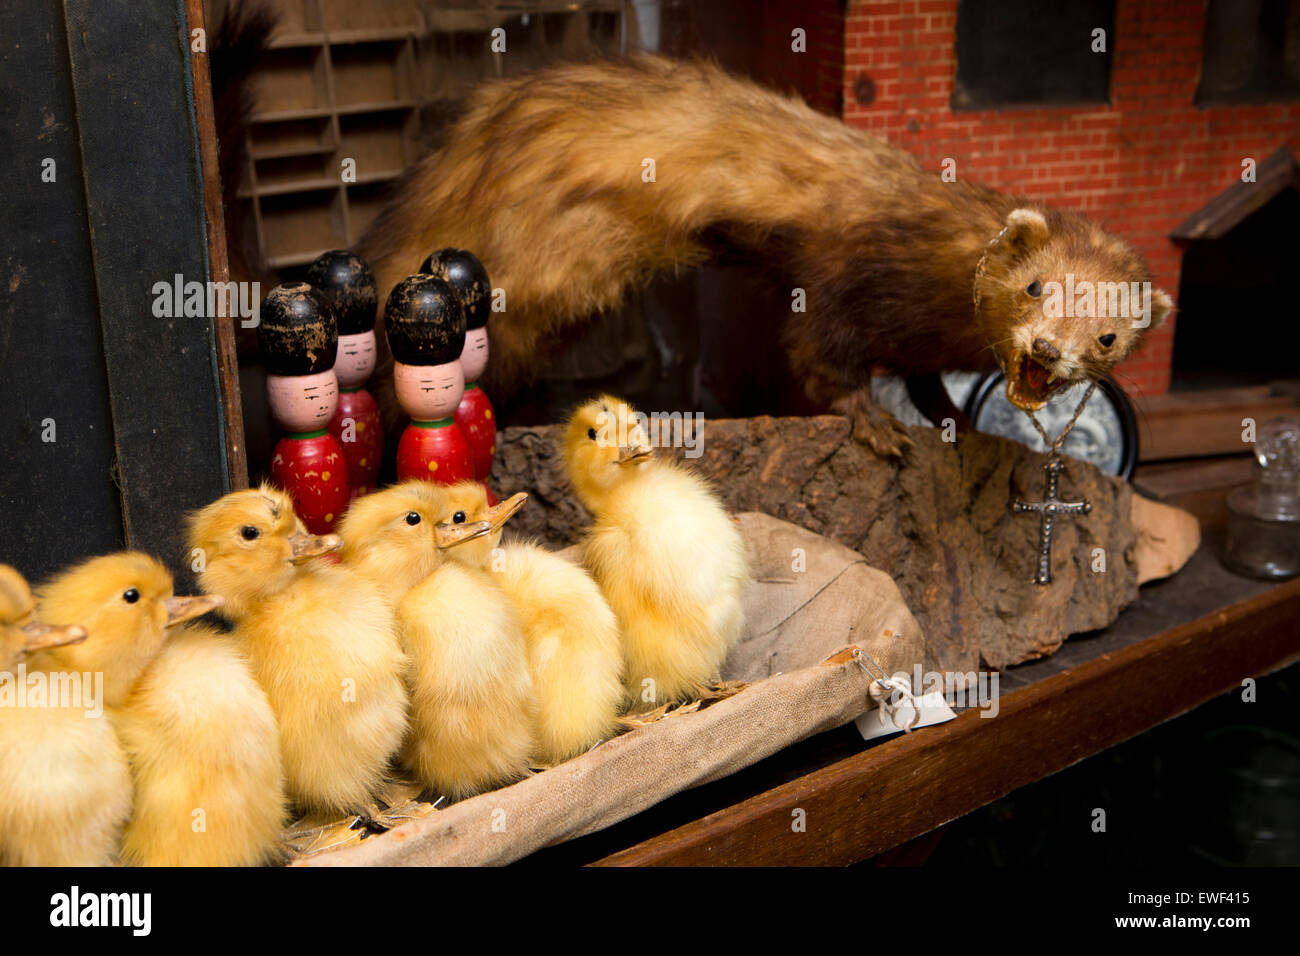 UK, England, Shropshire, Bridgnorth, Bank Street, A’tique shop, stuffed ducklings and mink amongst antiques Stock Photo